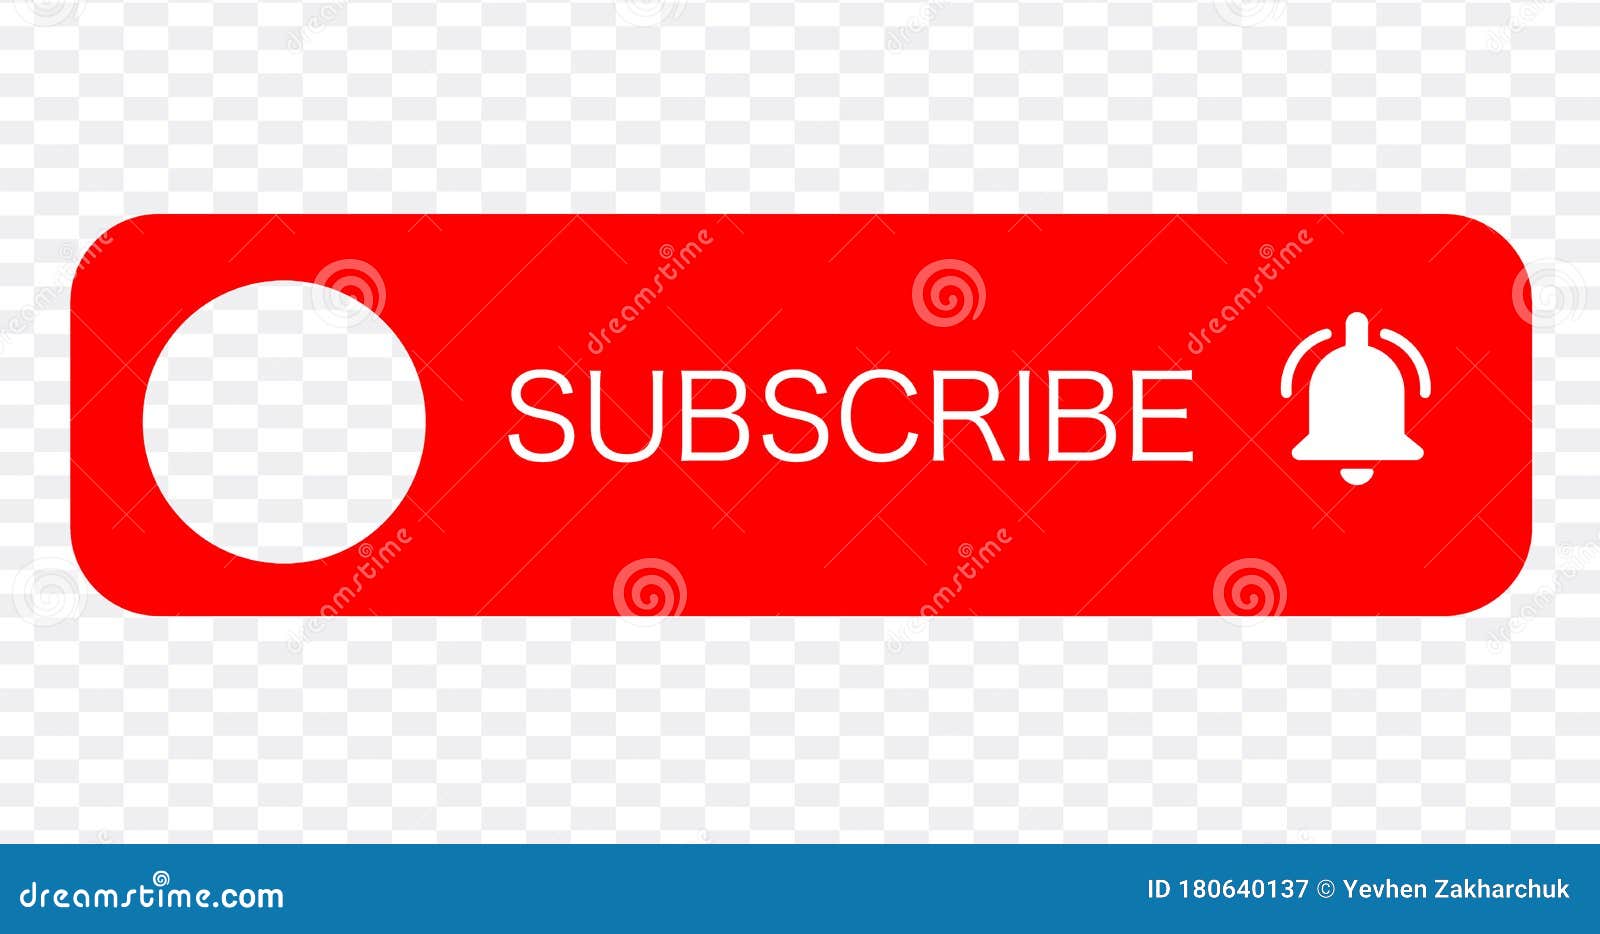 SUBSCRIBE - Button Red Color with Handon Transparent Background. YouTube  Channel. Vector Illustration Stock Illustration - Illustration of member,  channel: 180640137